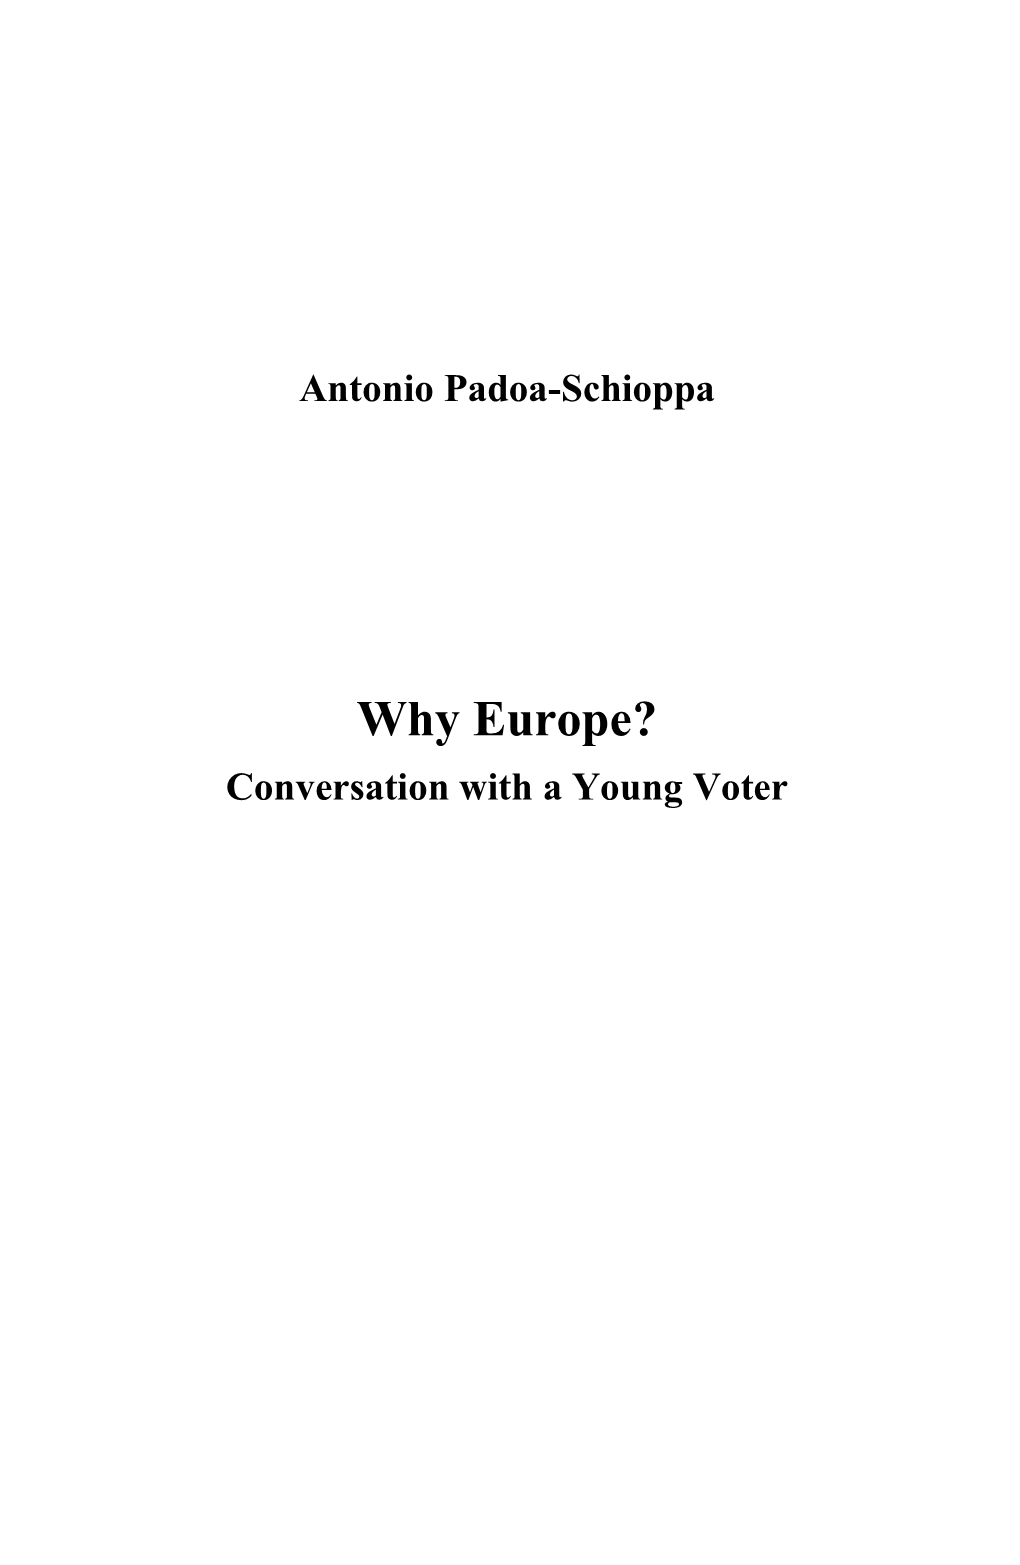 Why Europe? Conversation with a Young Voter